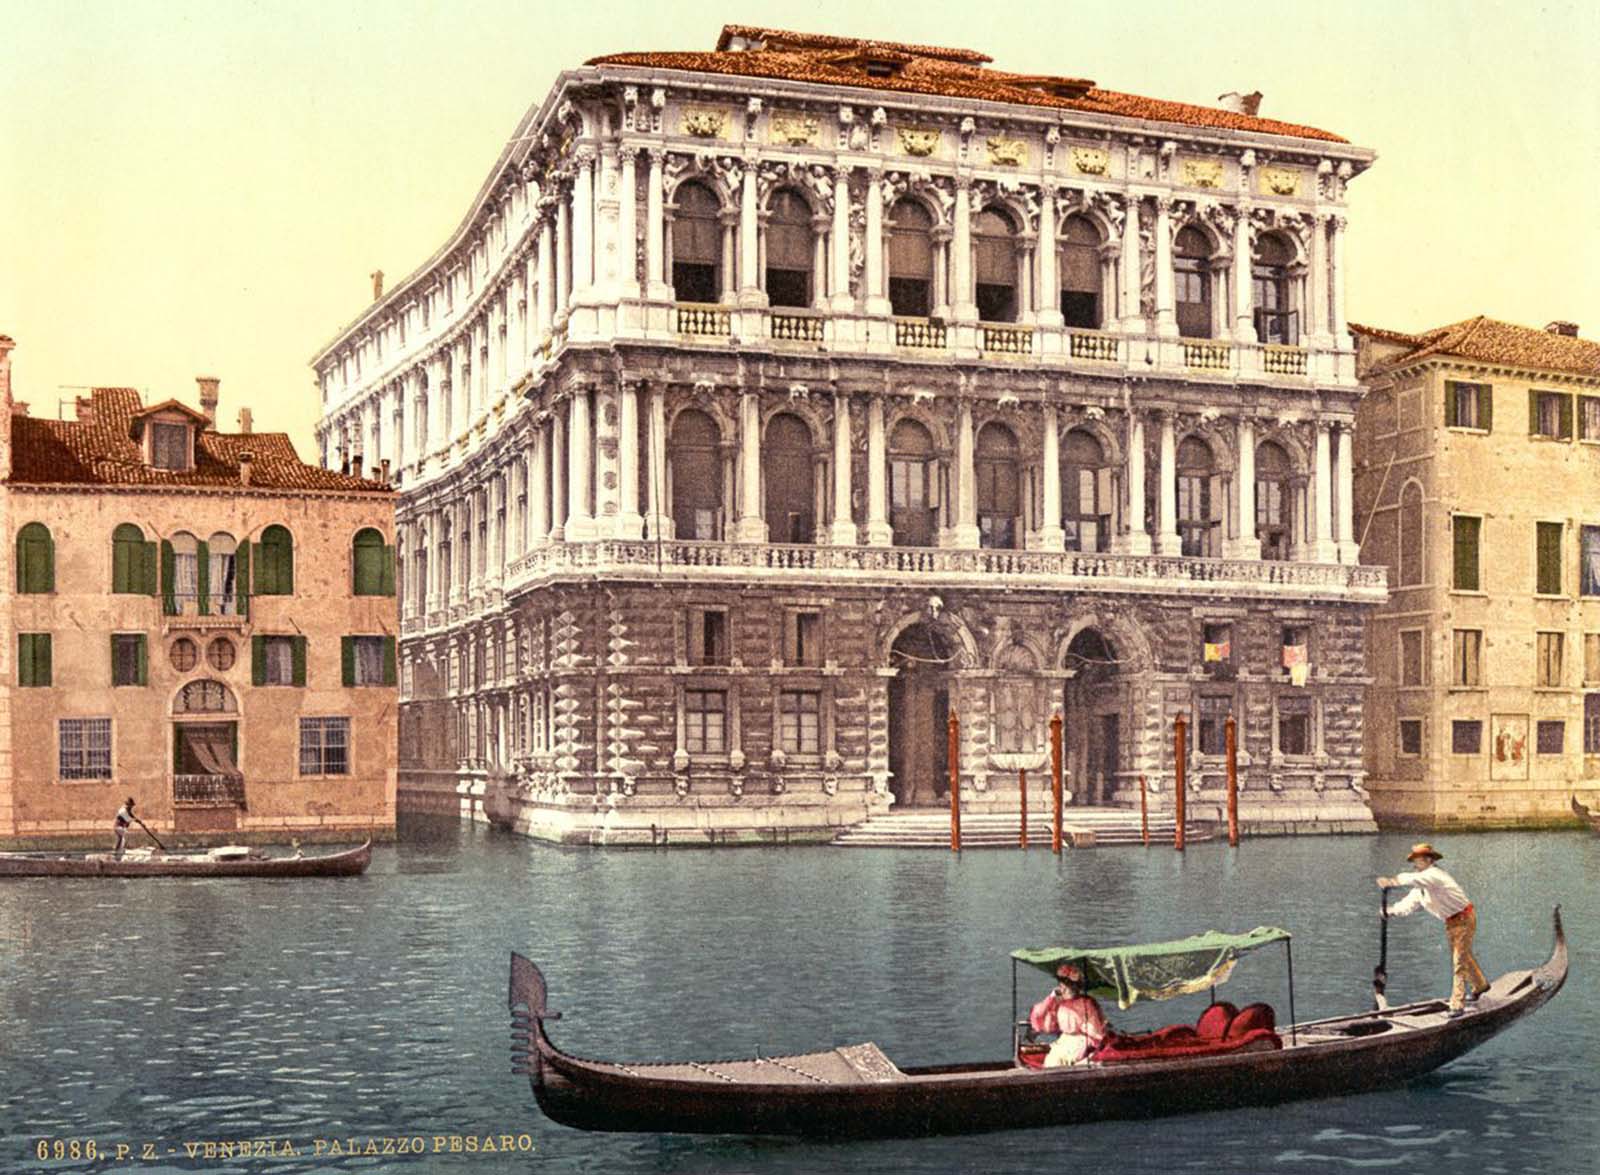 venice-in-beautiful-old-color-images-1890_14.jpg